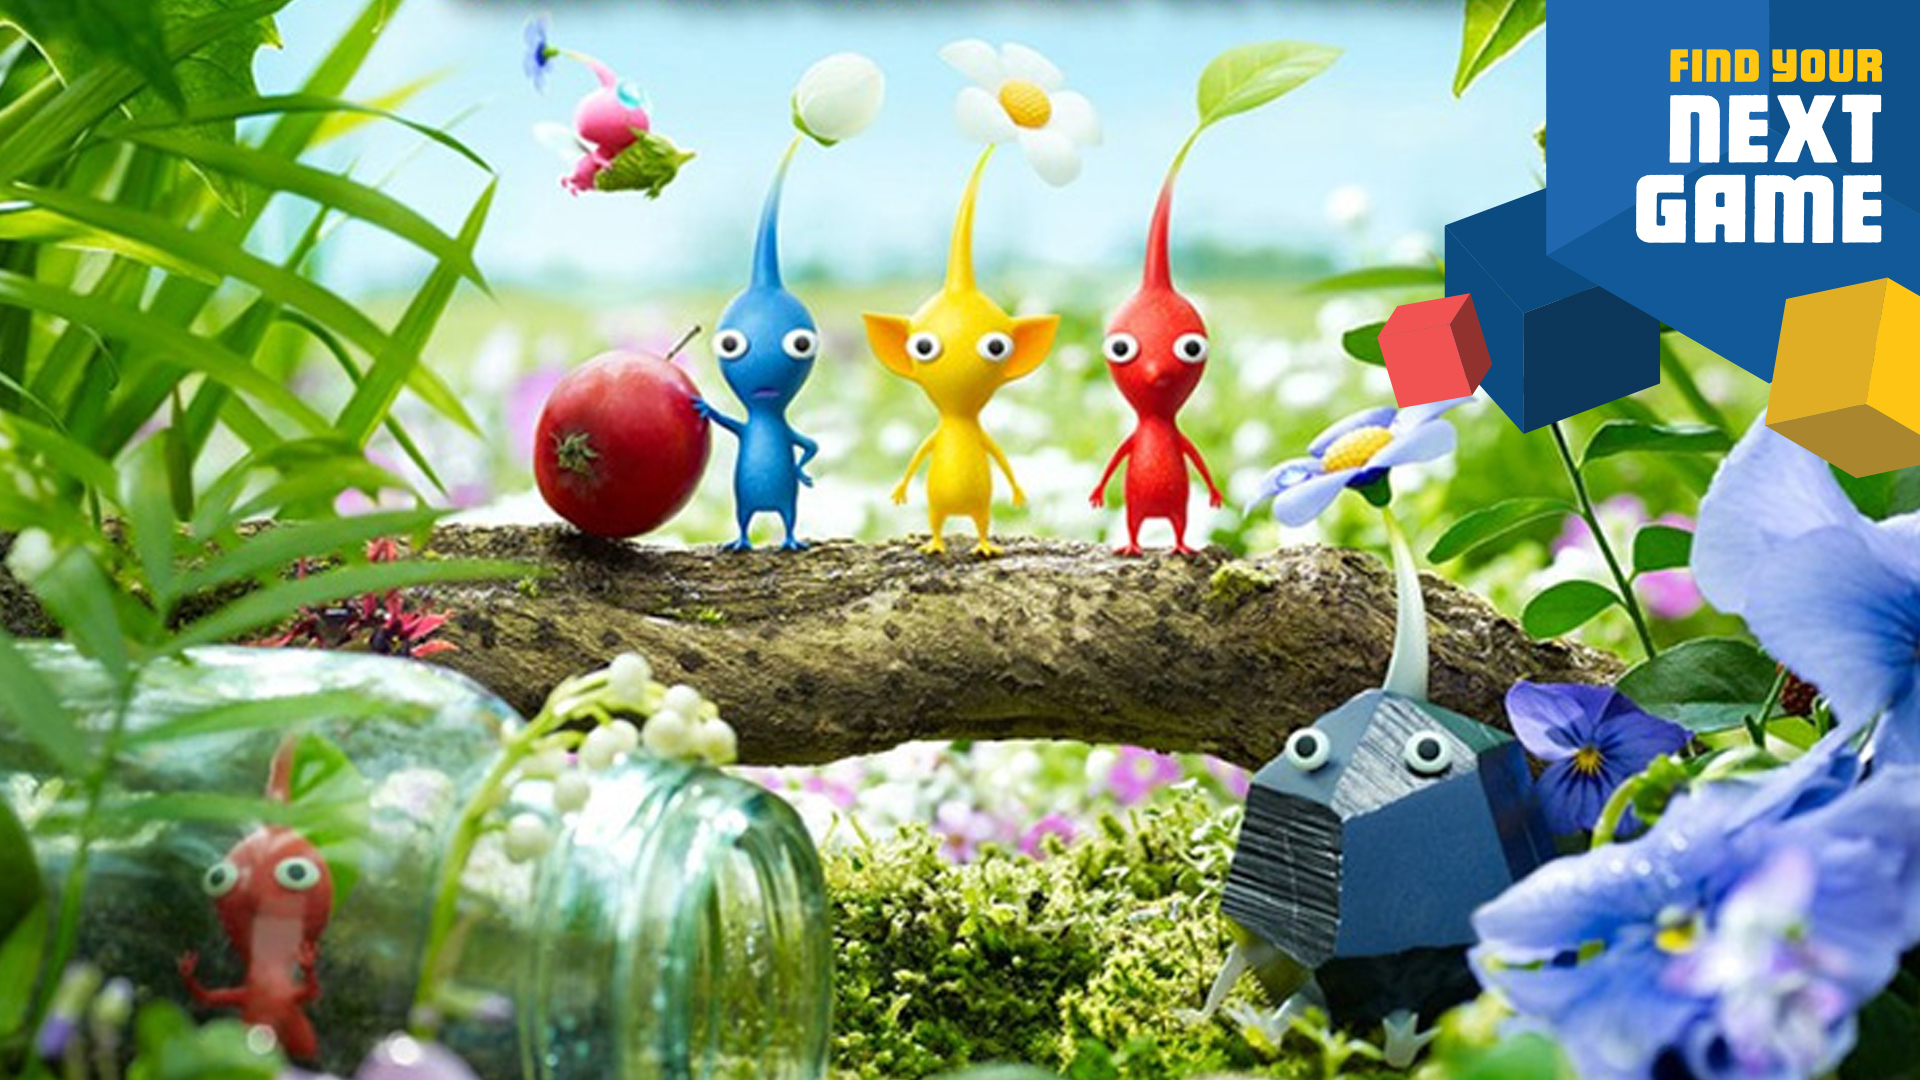 Pikmin 3 Deluxe goes official and reveals its release date